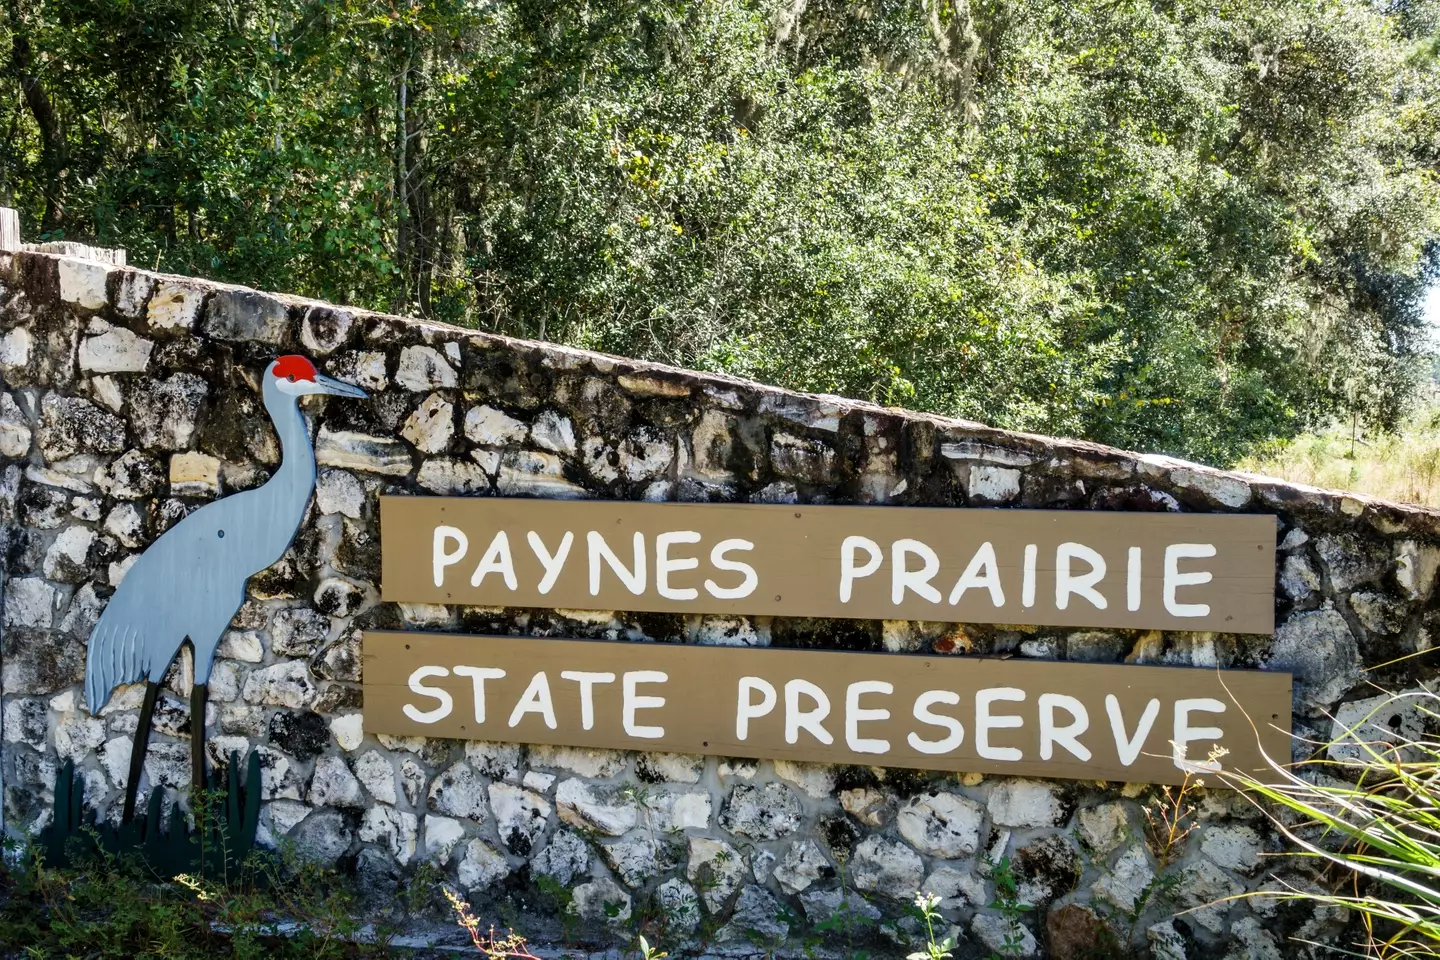 The plane went down in Paynes Prairie State Preserve.